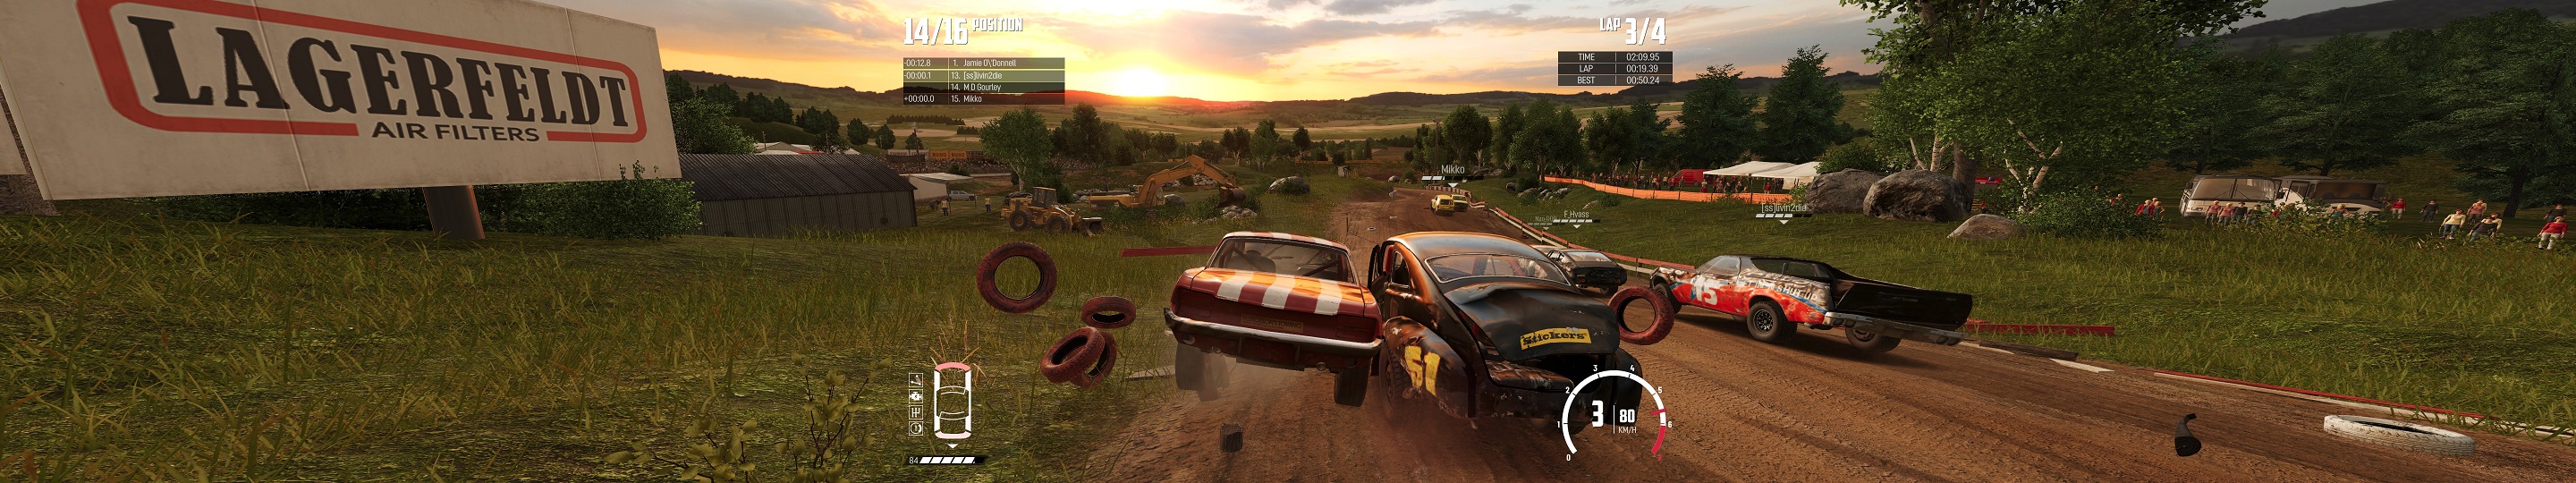 WRECKFEST with RTX2070 sign copy.jpg